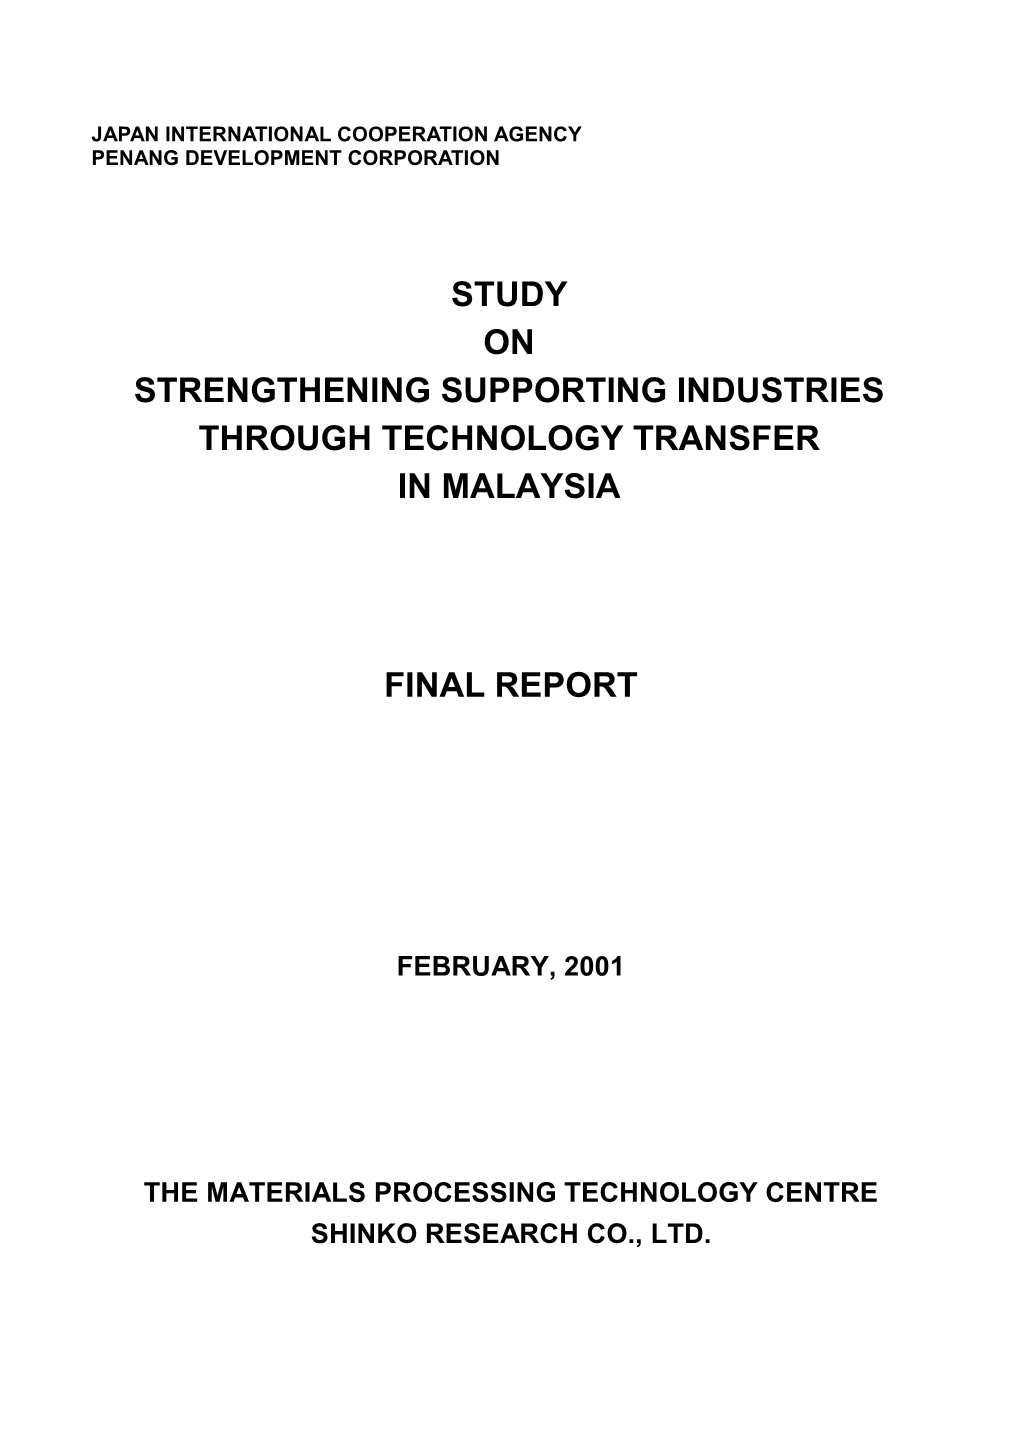 Study on Strengthening Supporting Industries Through Technology Transfer in Malaysia